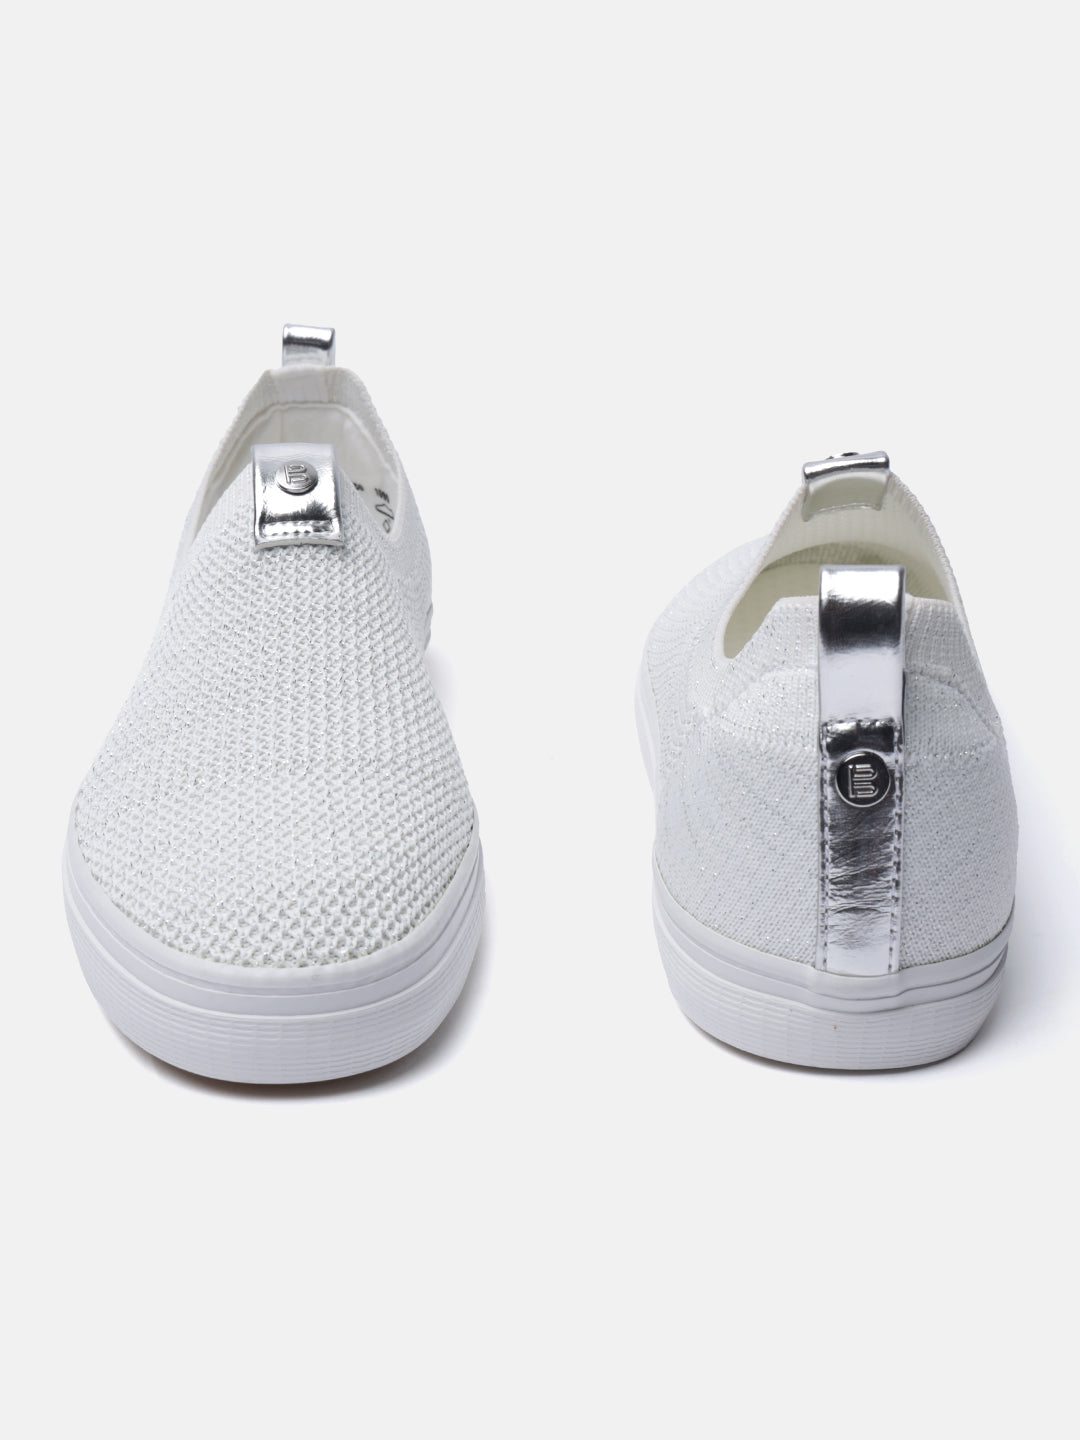 Lali White & Silver Casual Loafers